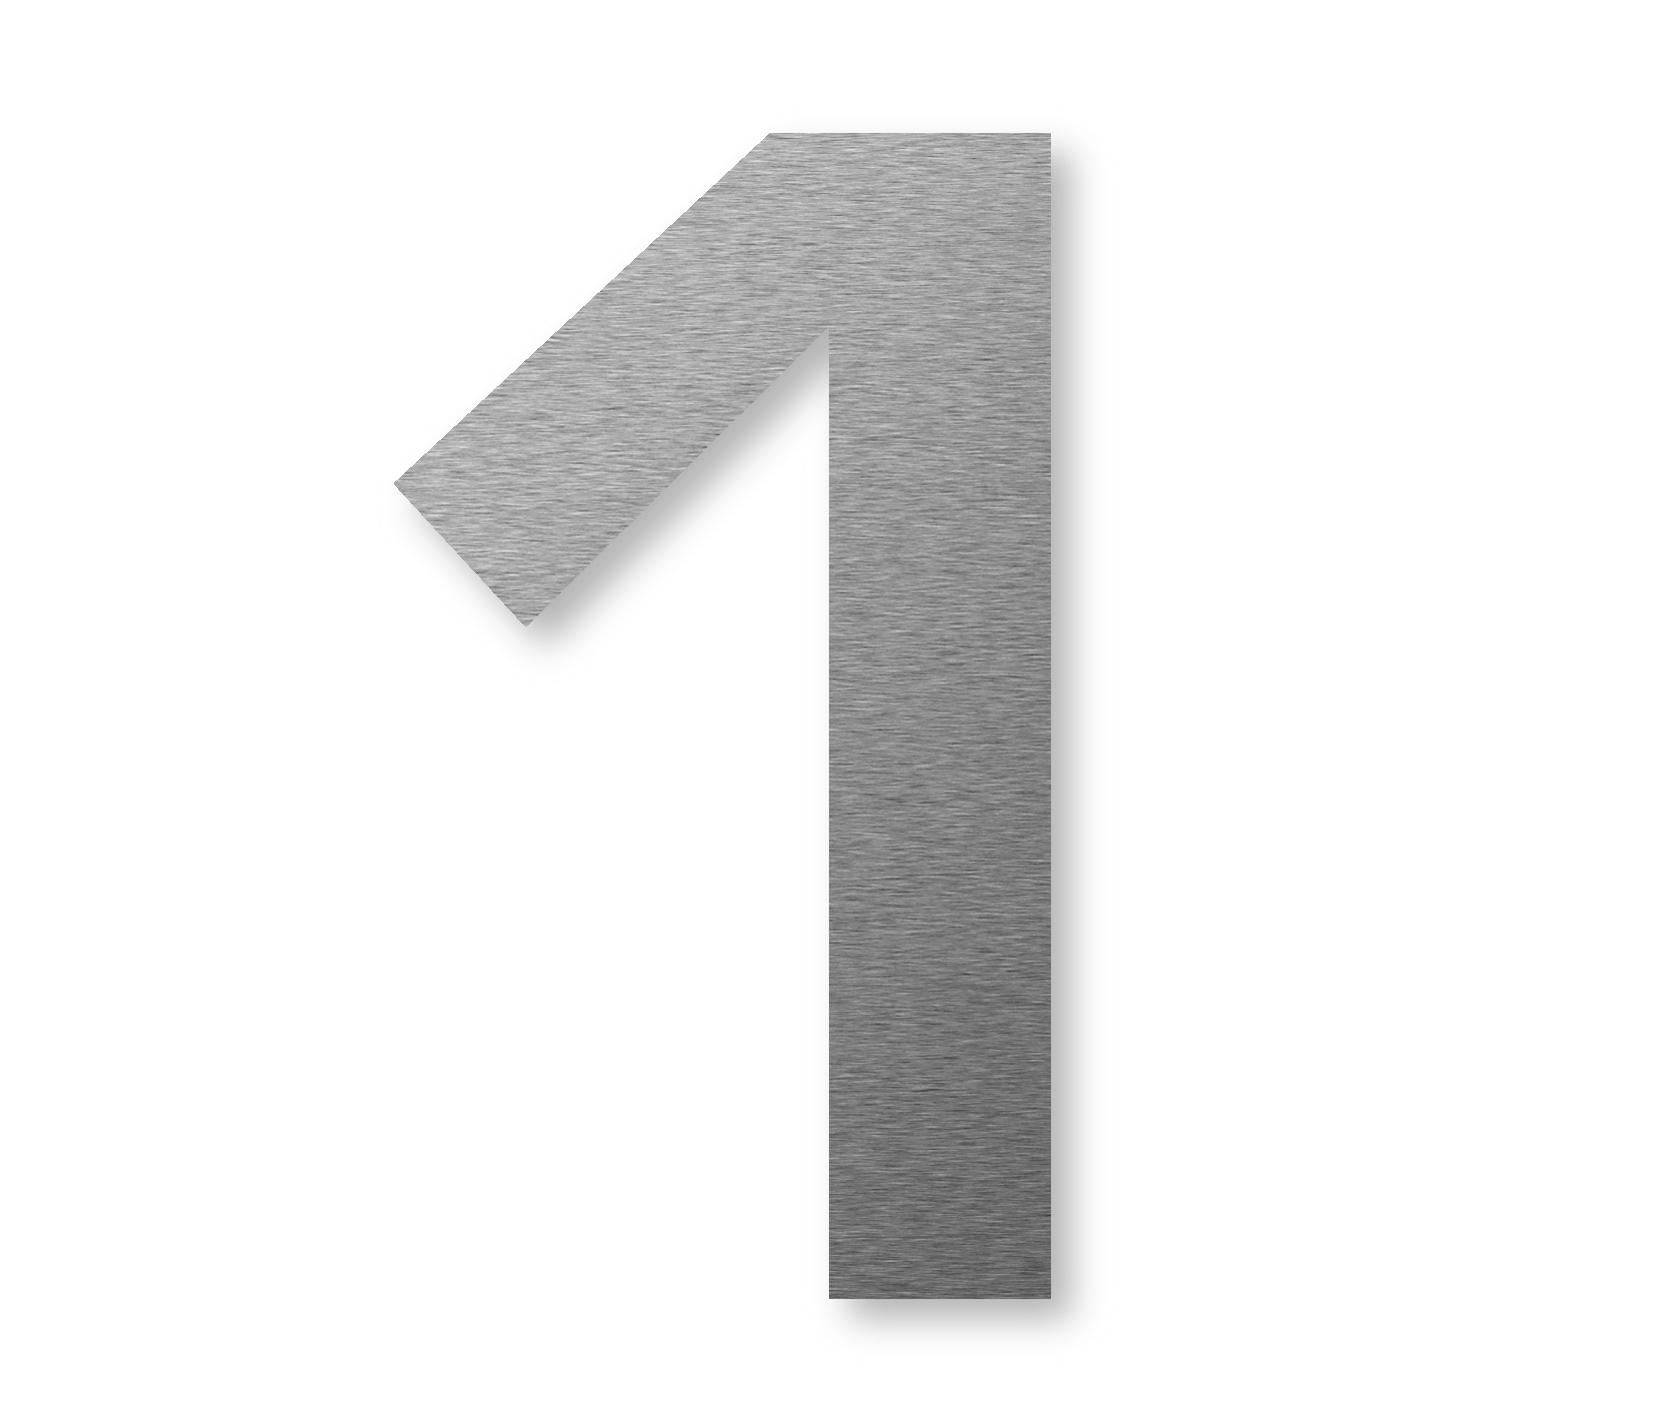 BIG NUMBER - Symbols / Signs from keilbach | Architonic